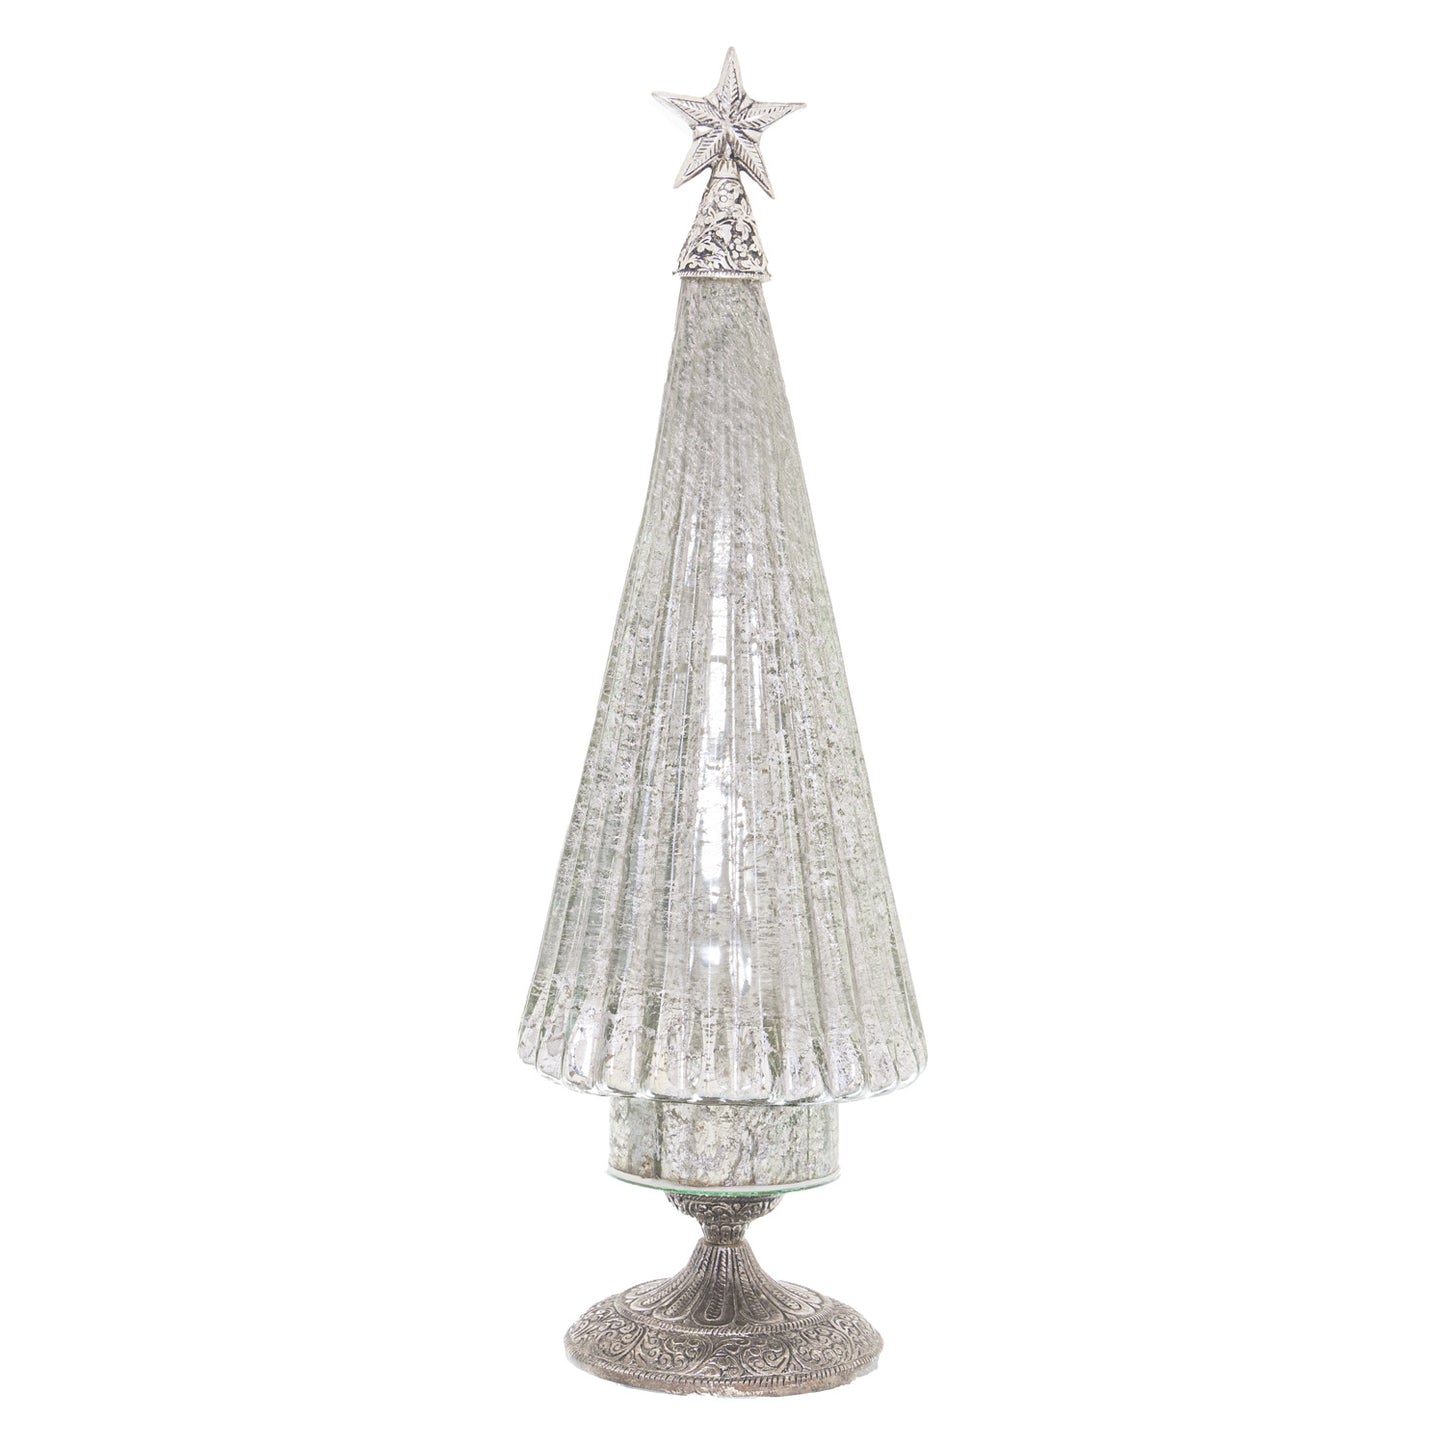 The Noel Collection Footed Glass Decorative Tree